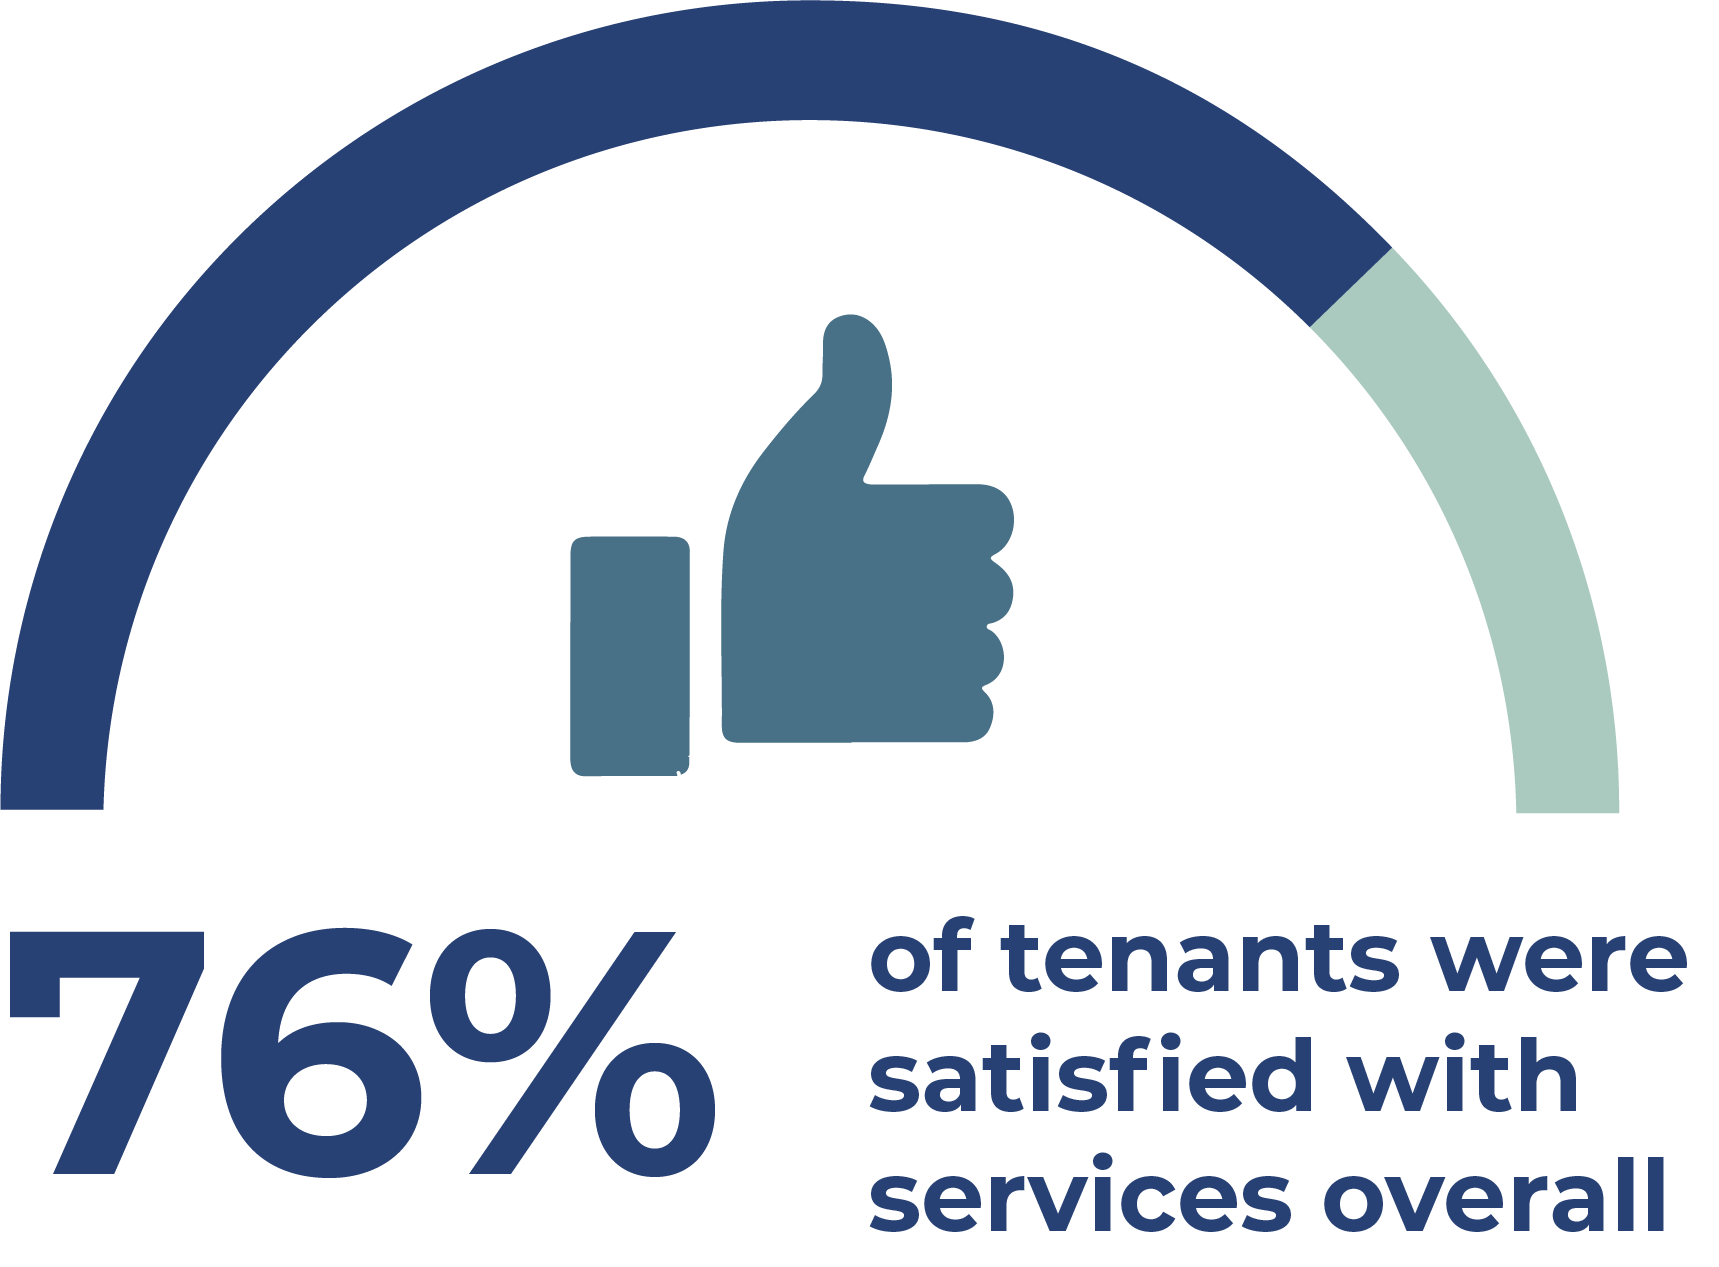 blue thumbs up graphic with the percentage of tenants who were satisfied (76%)